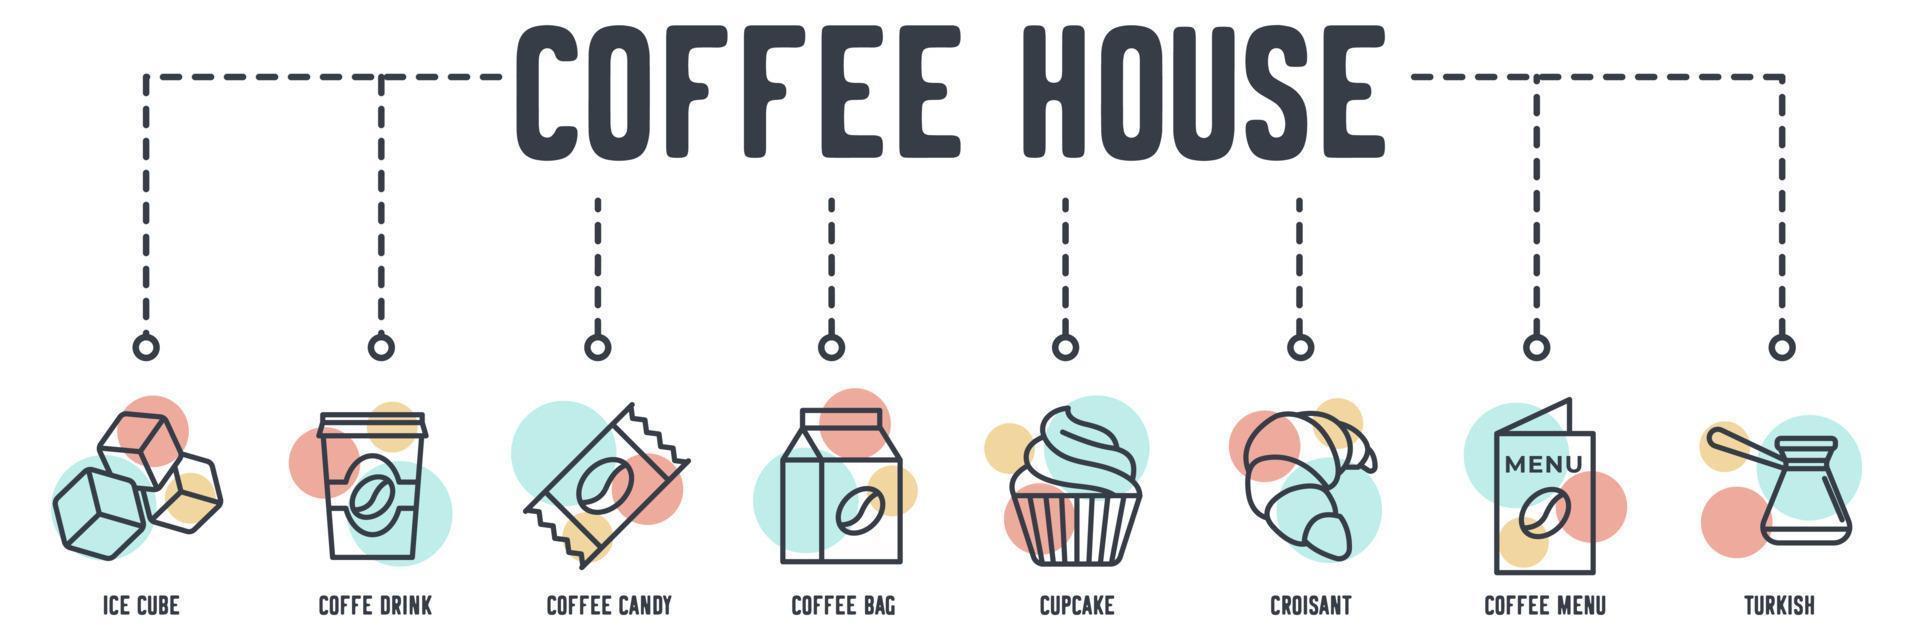 Coffee House banner web icon. ice cube, drink, candy, bag, cupcake, croissant, coffee menu, turkish vector illustration concept.